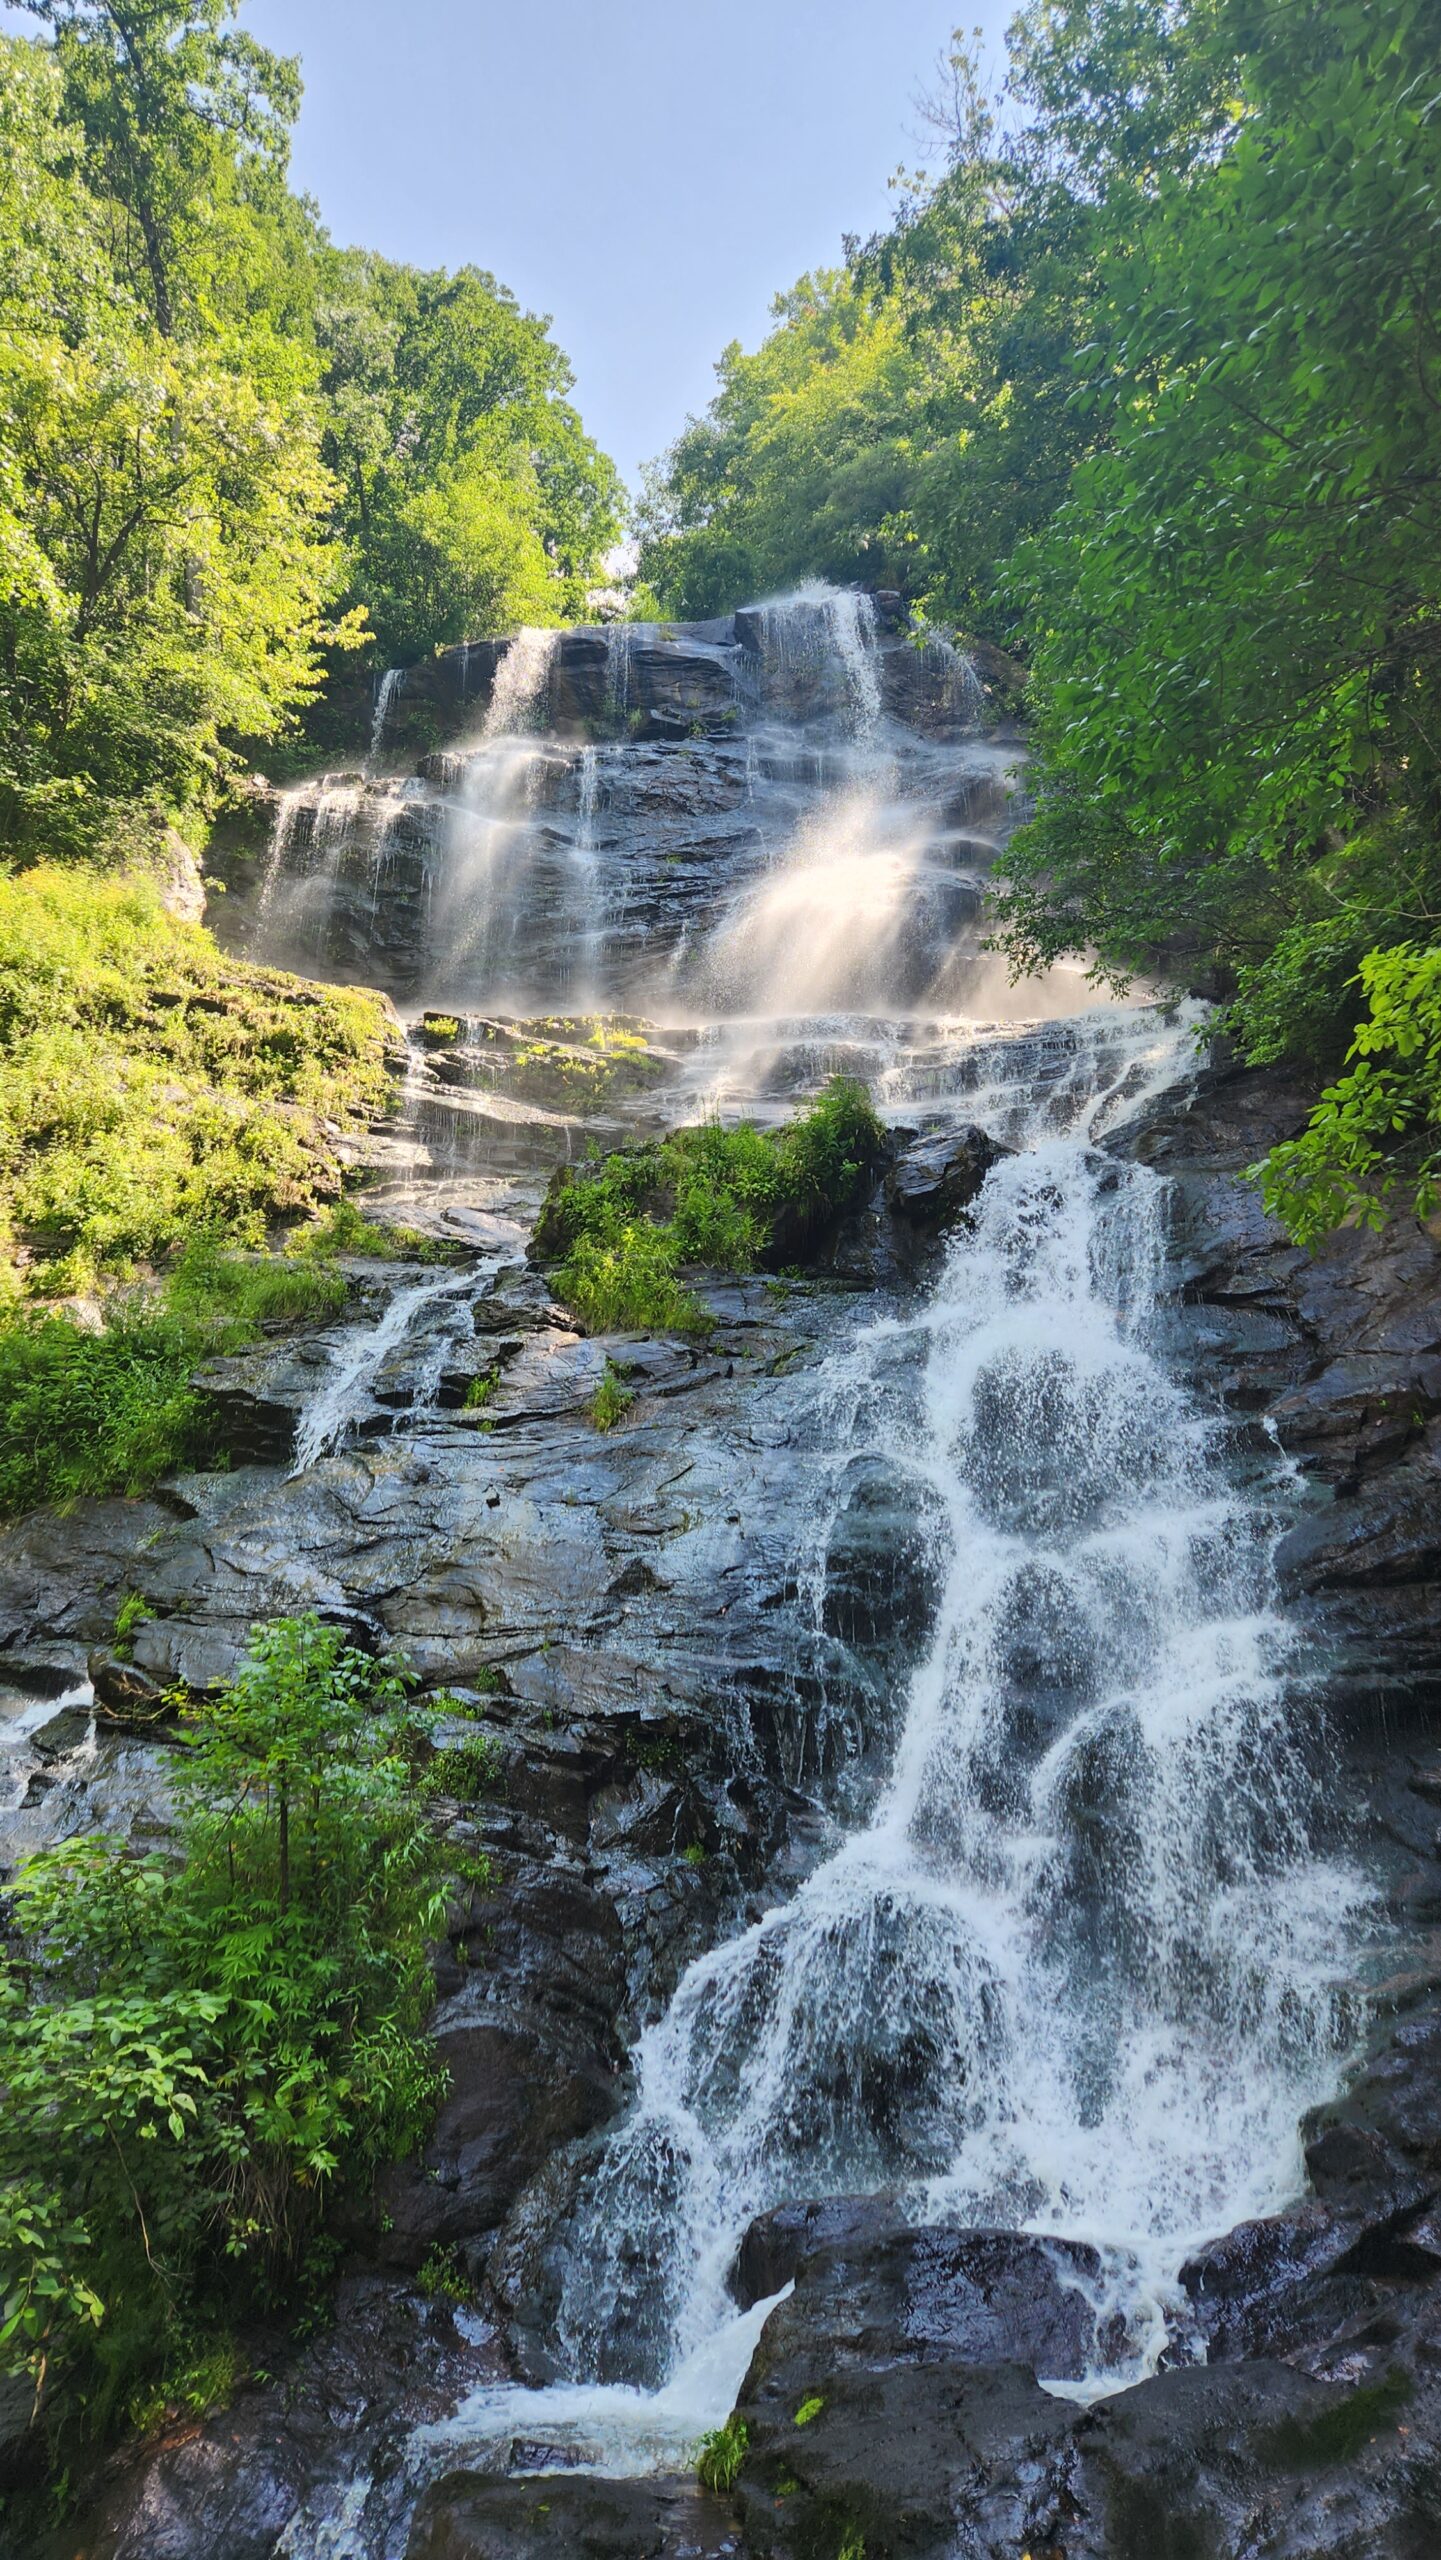 a waterfall cascading down the stones, back and forth with water and mist catching the light. Green trees and leaves are illuminated, ranging from light green to bright yellow in the sun.